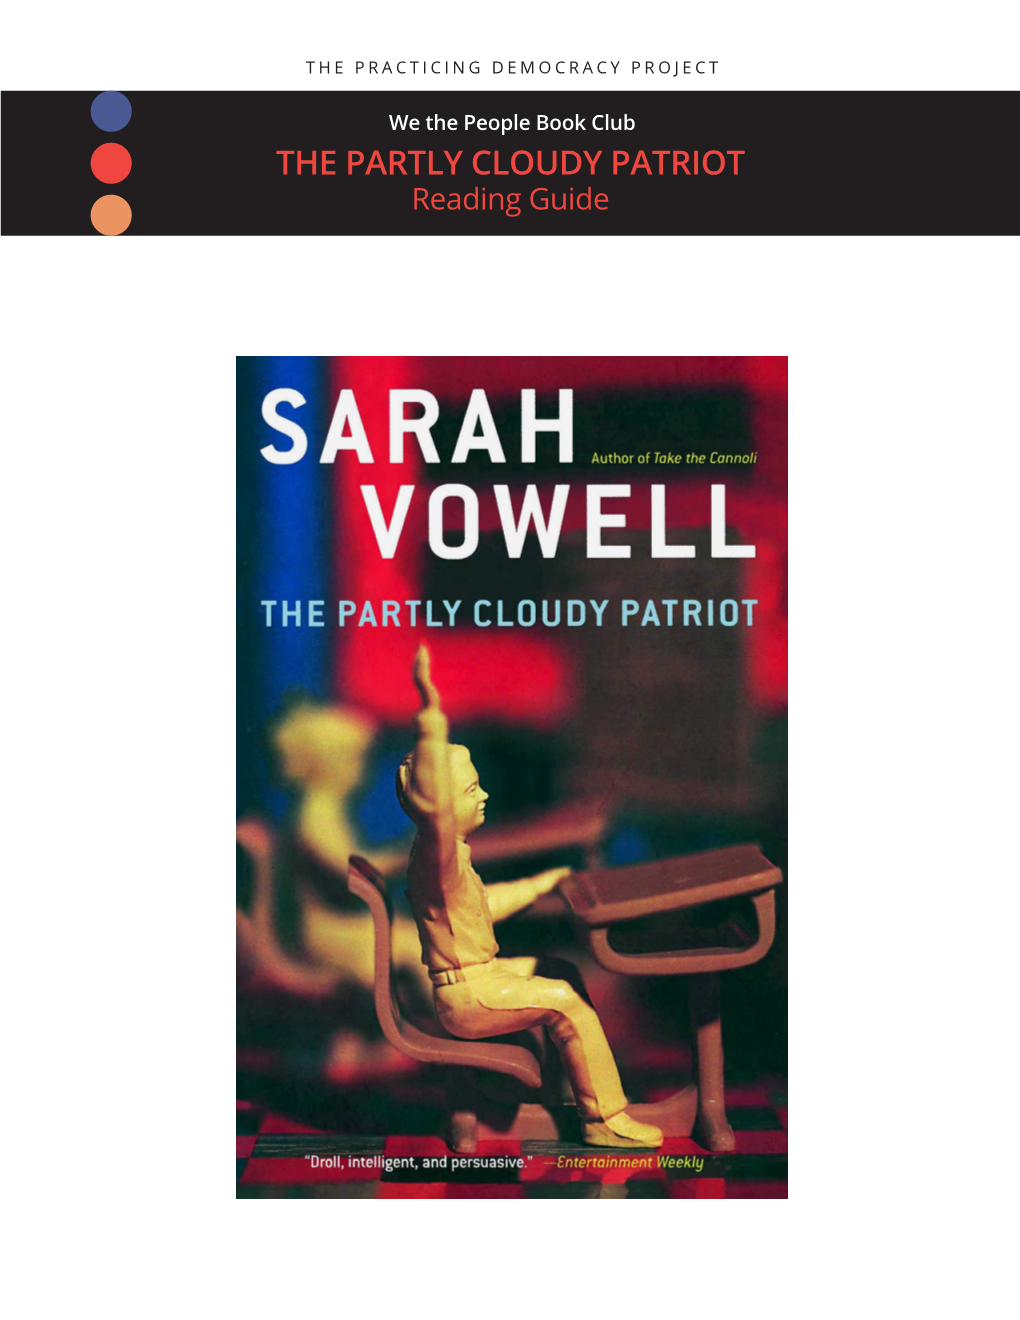 THE PARTLY CLOUDY PATRIOT Reading Guide with This Selection, the We the People Book Club Takes a Pointedly Lighthearted Turn